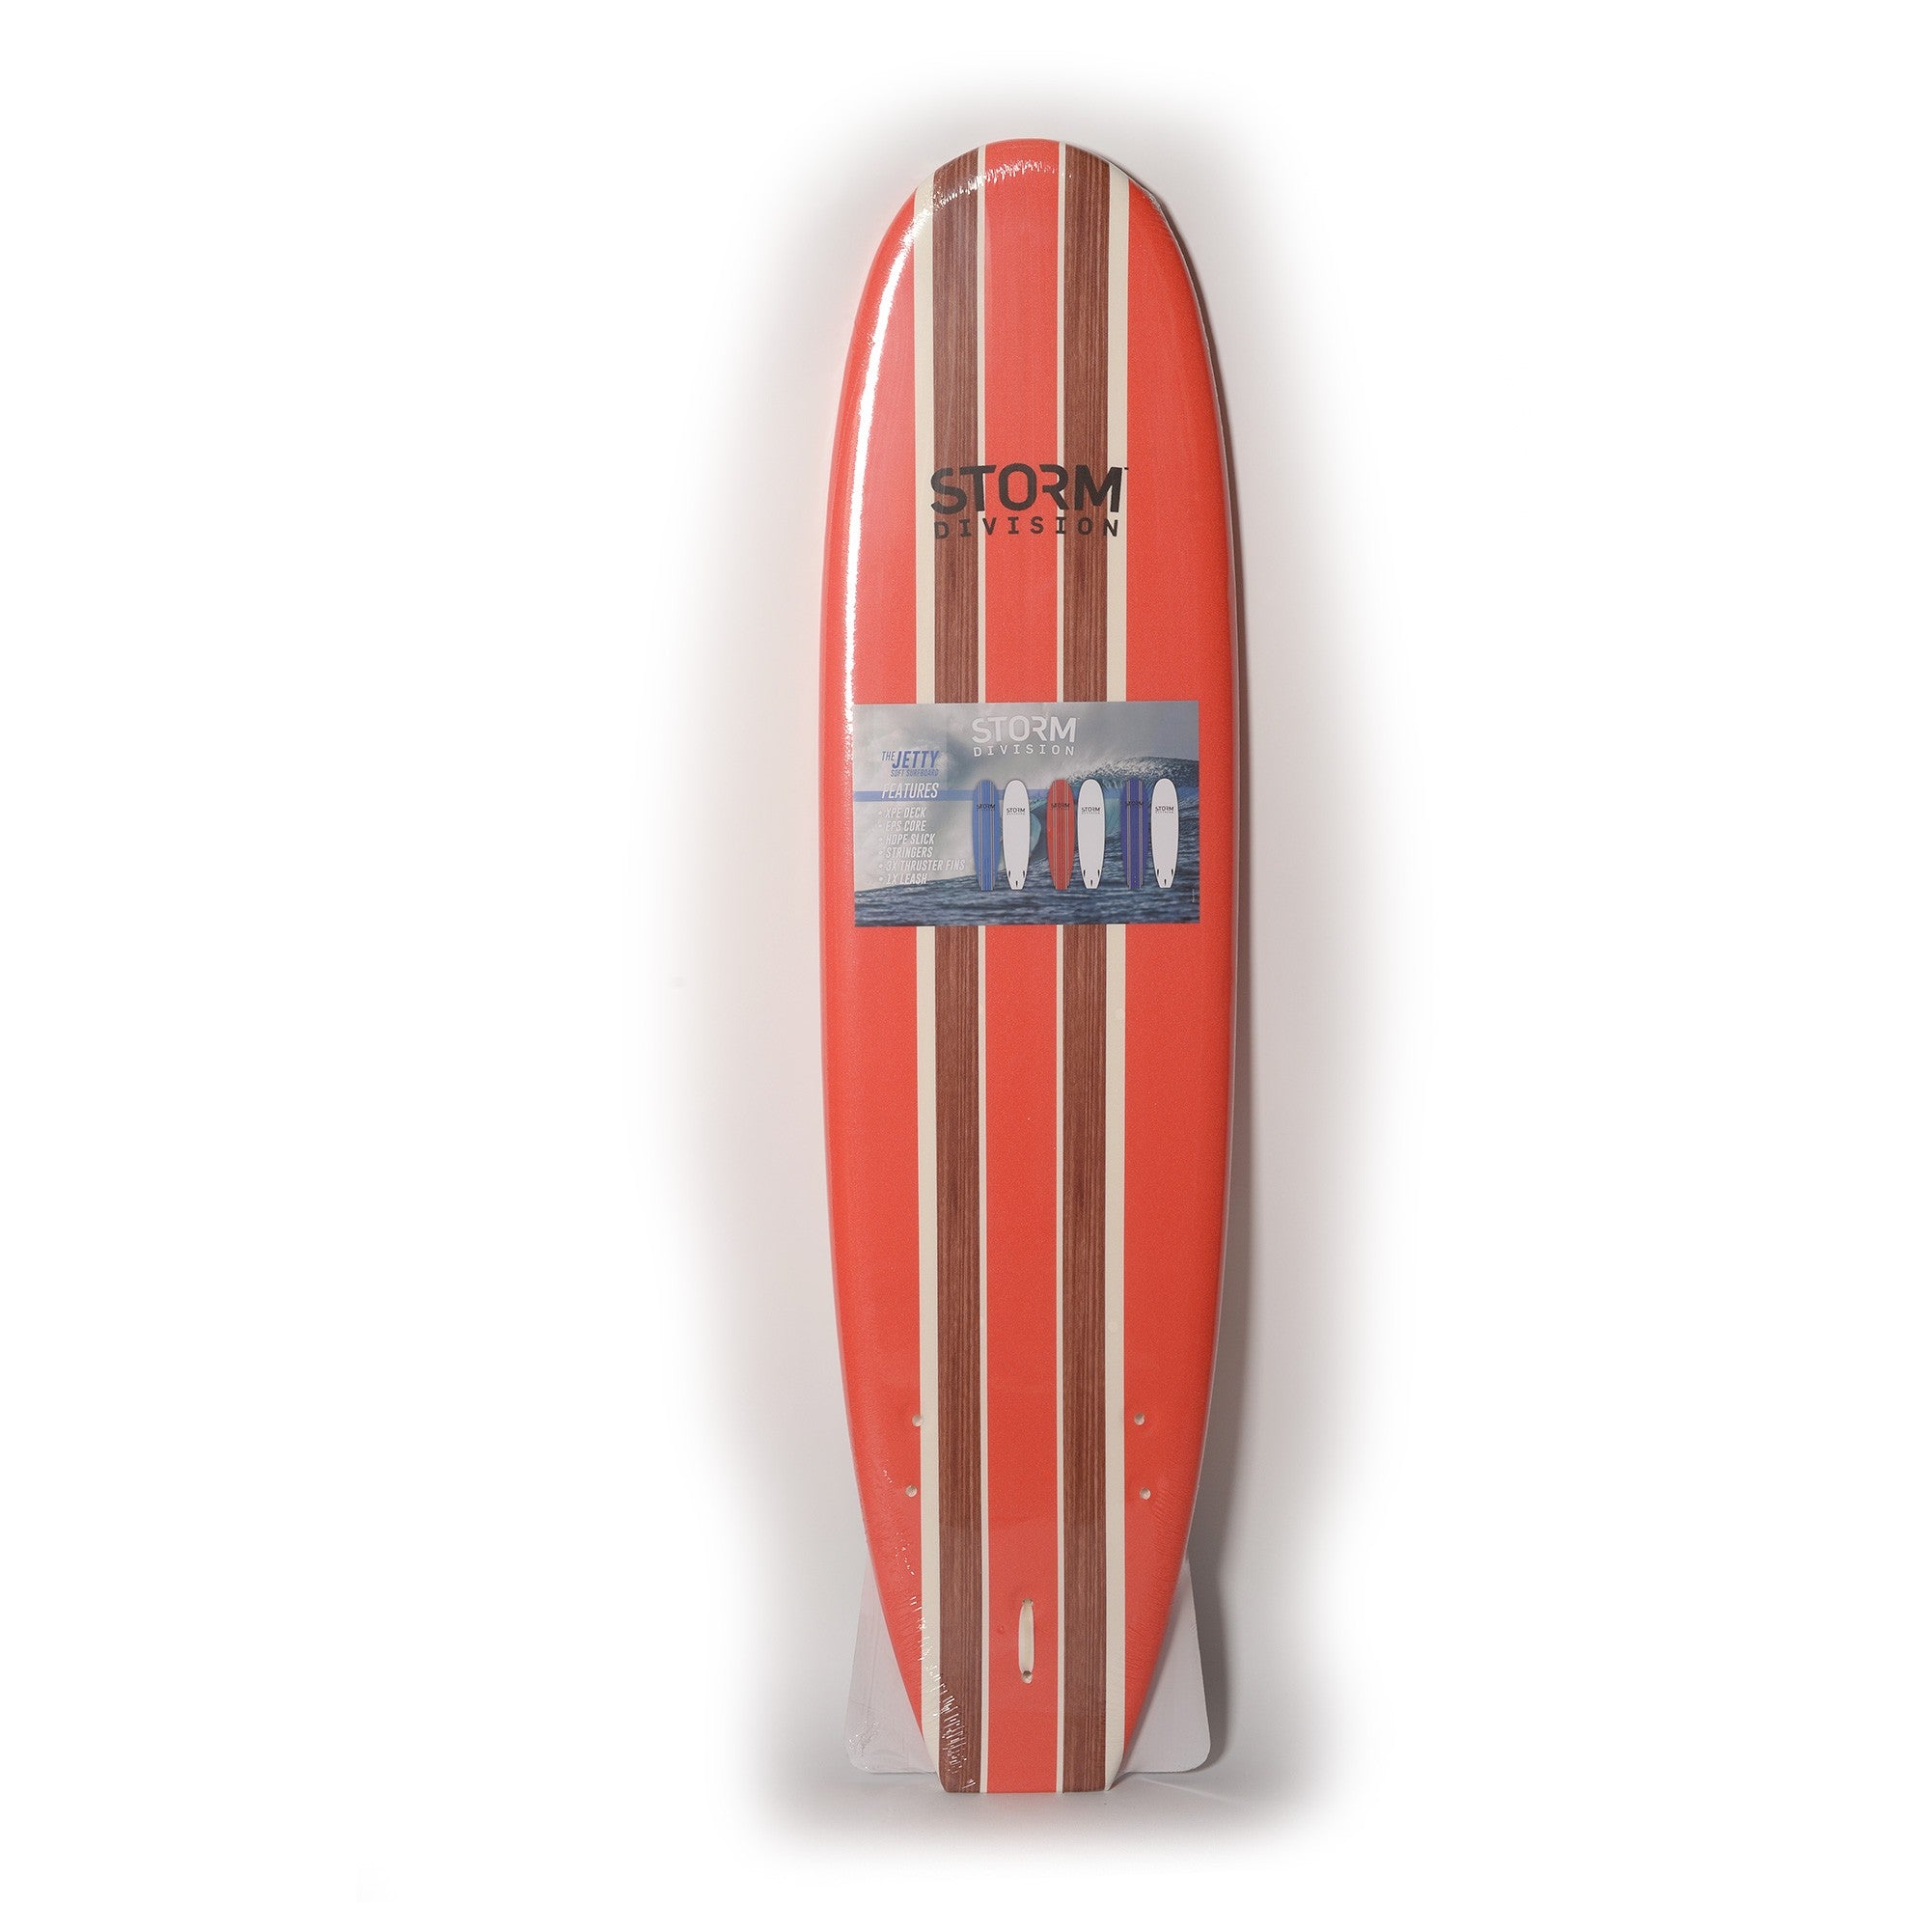 STORM DIVISION - Jetty Softboard - Foam Surfboard - 8'0 - Red